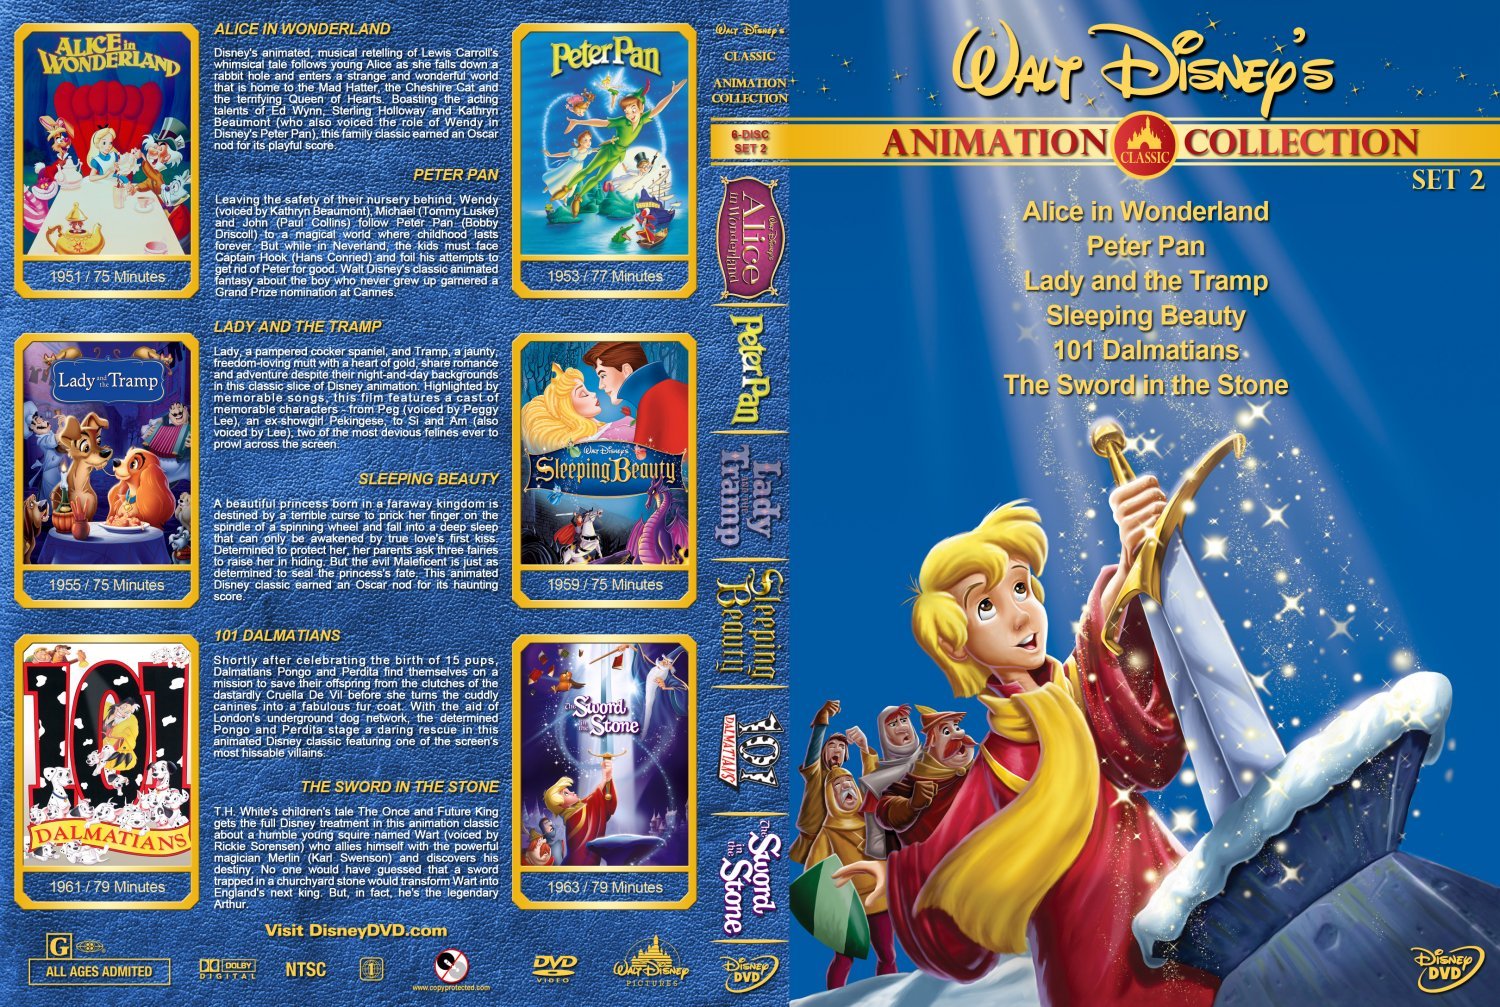 Walt Disney’s Classic Animation Collection Set 2 | Dvd Covers and Labels